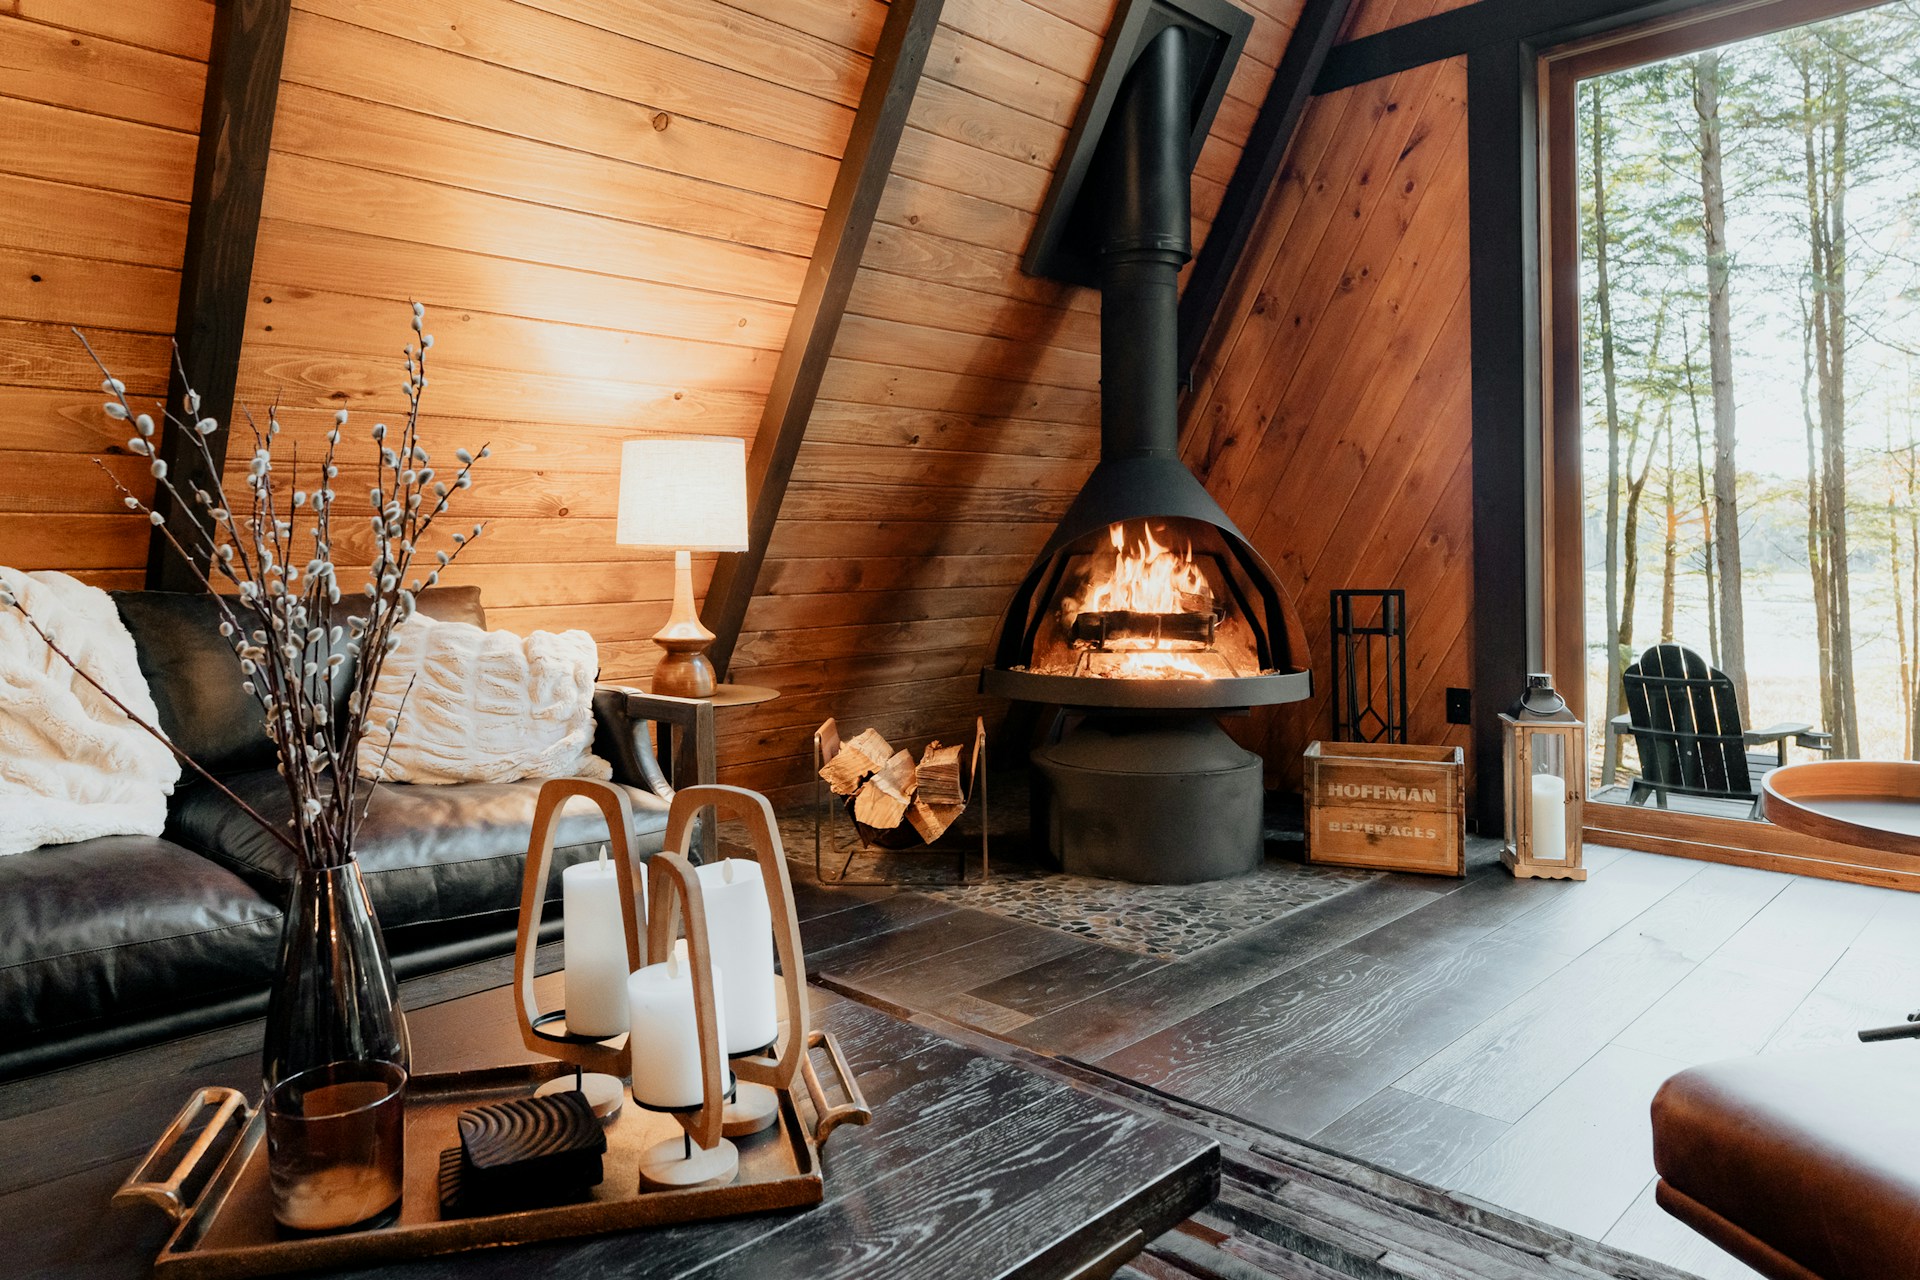 Cozy wood cabin with a fireplace